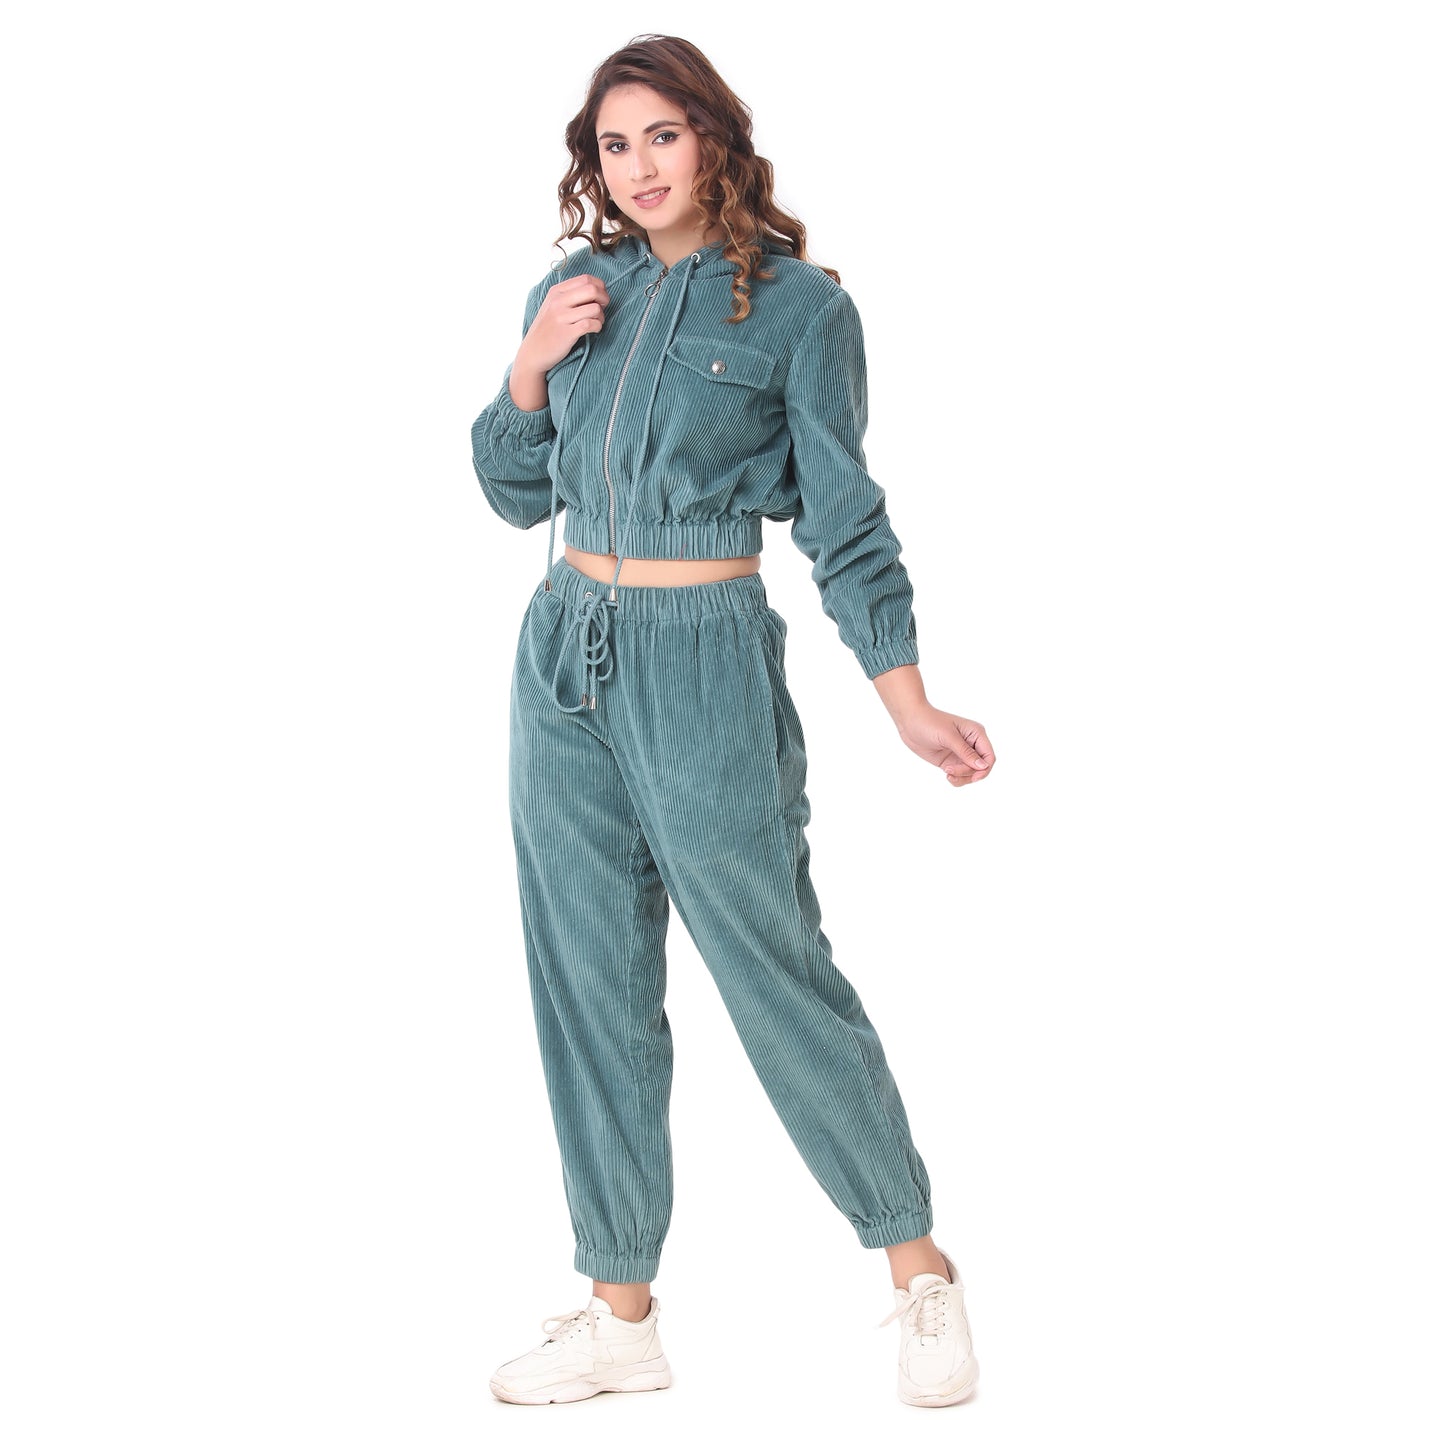 Corduroy Coord Joggers Set With Hoodie